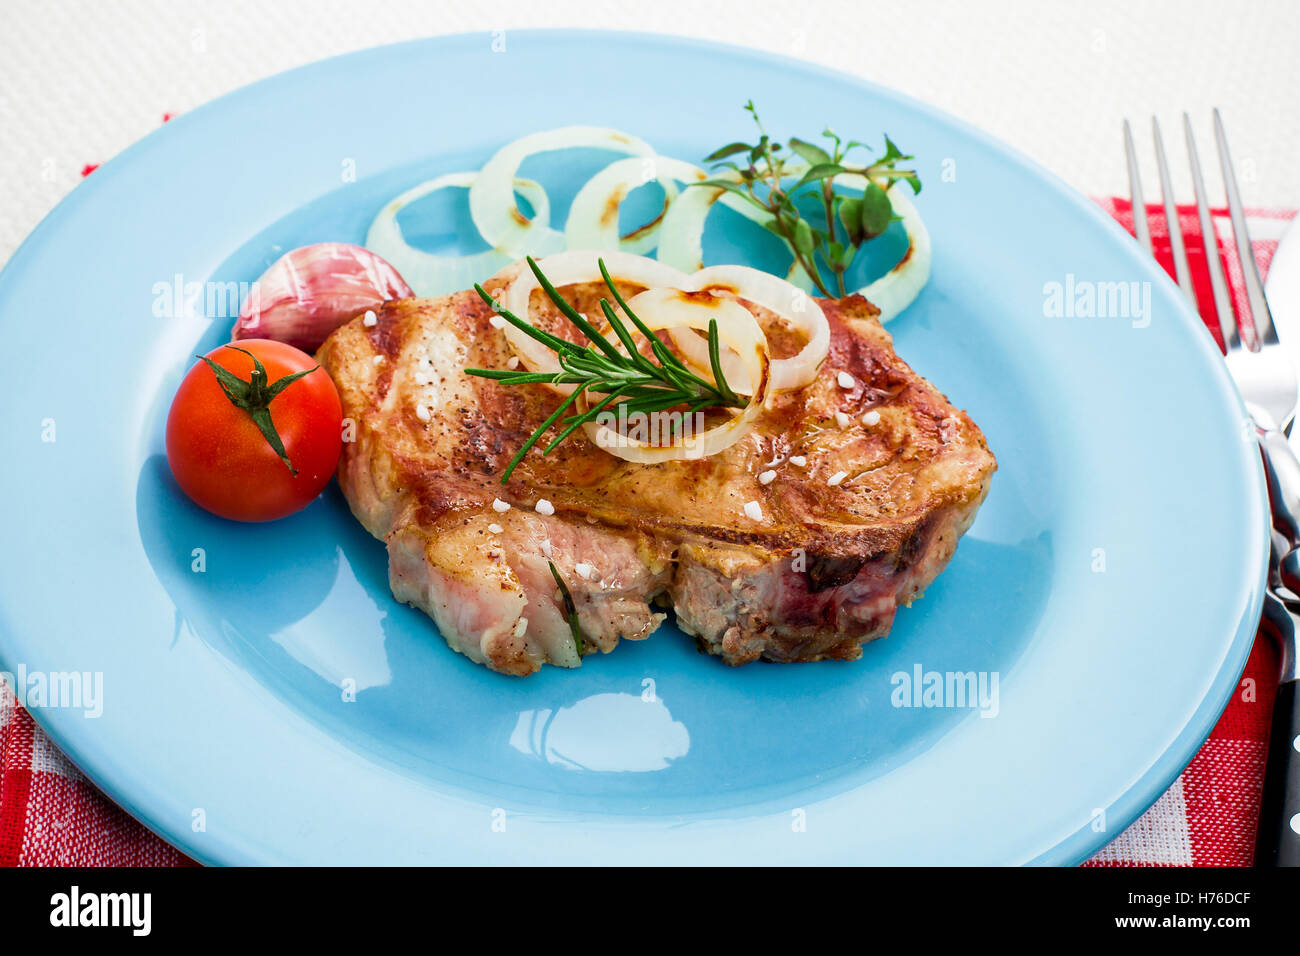 Juicy grilled pork chop with onion rings, stylish tinted Stock Photo